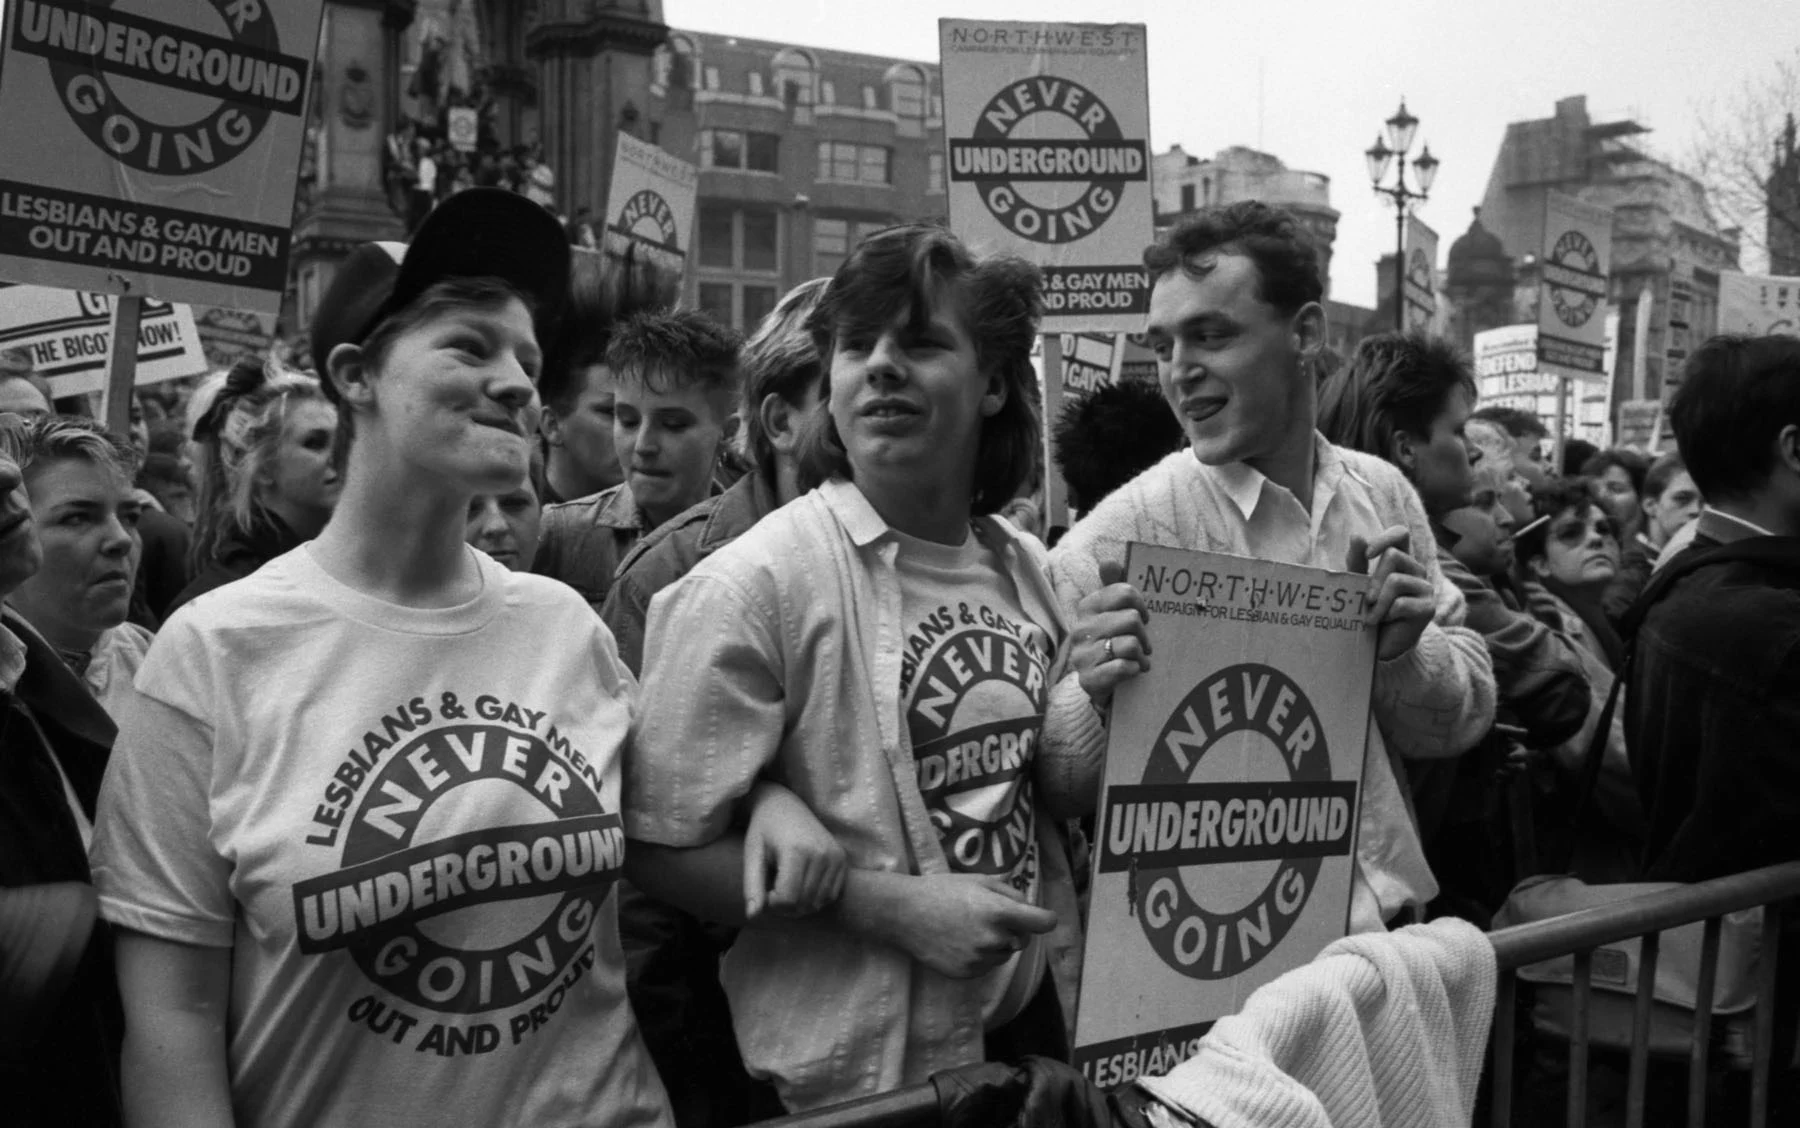 A black-and-white photograph of three smiling protestors standing next to each other behind a metal barricade, holding signs that read “LESBIANS & GAY MEN NEVER GOING UNDERGROUND OUT AND PROUD”. Behind them stand dozens of other protestors, holding signs with the “NEVER GOING UNDERGROUND” logo on them.